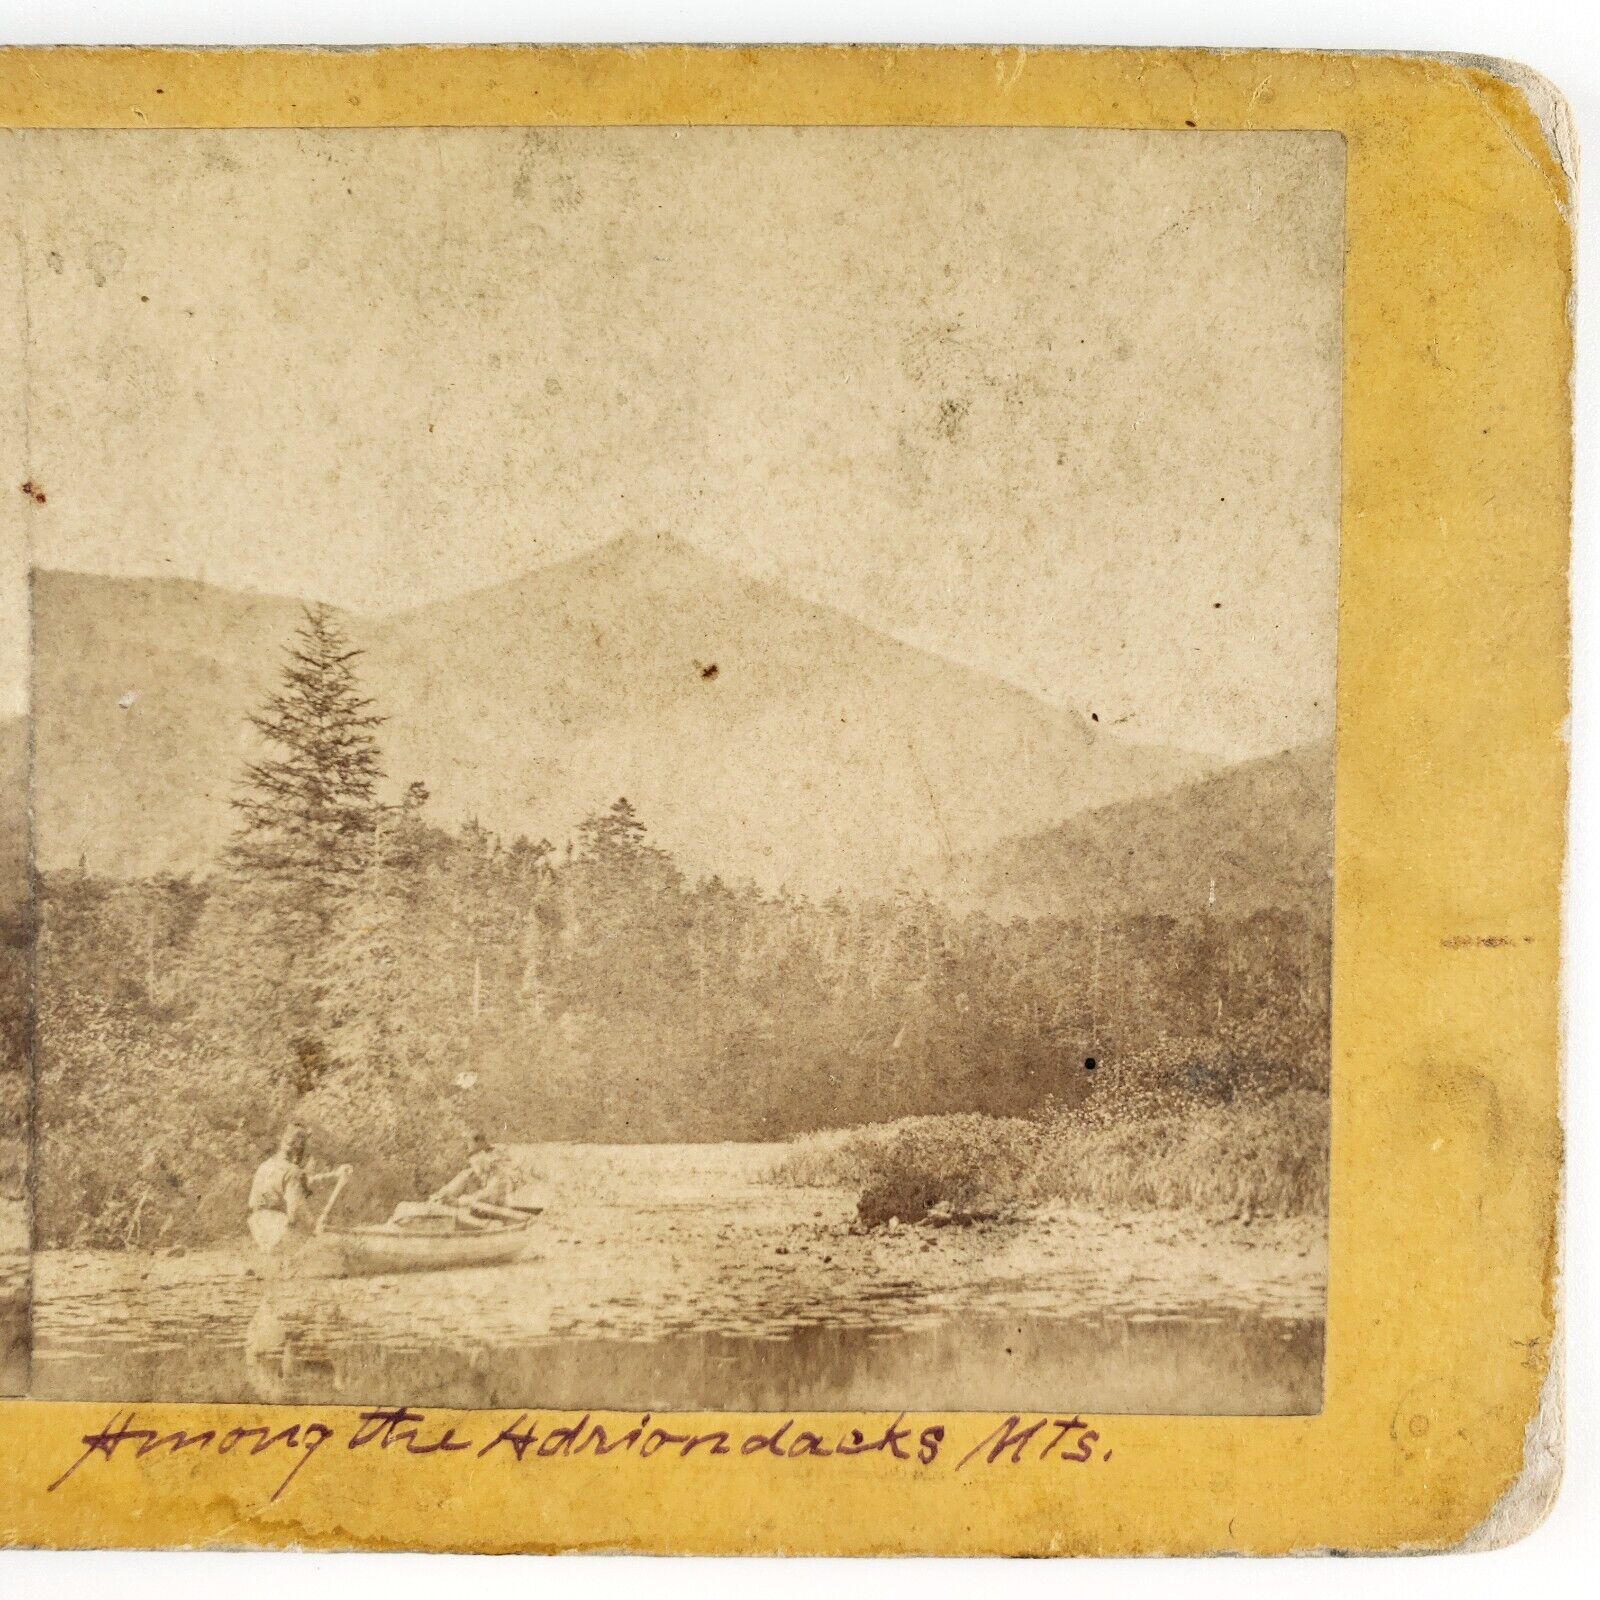 Adirondack Mountains New York Stereoview c1874 Rowing Boat Down River Card A2674